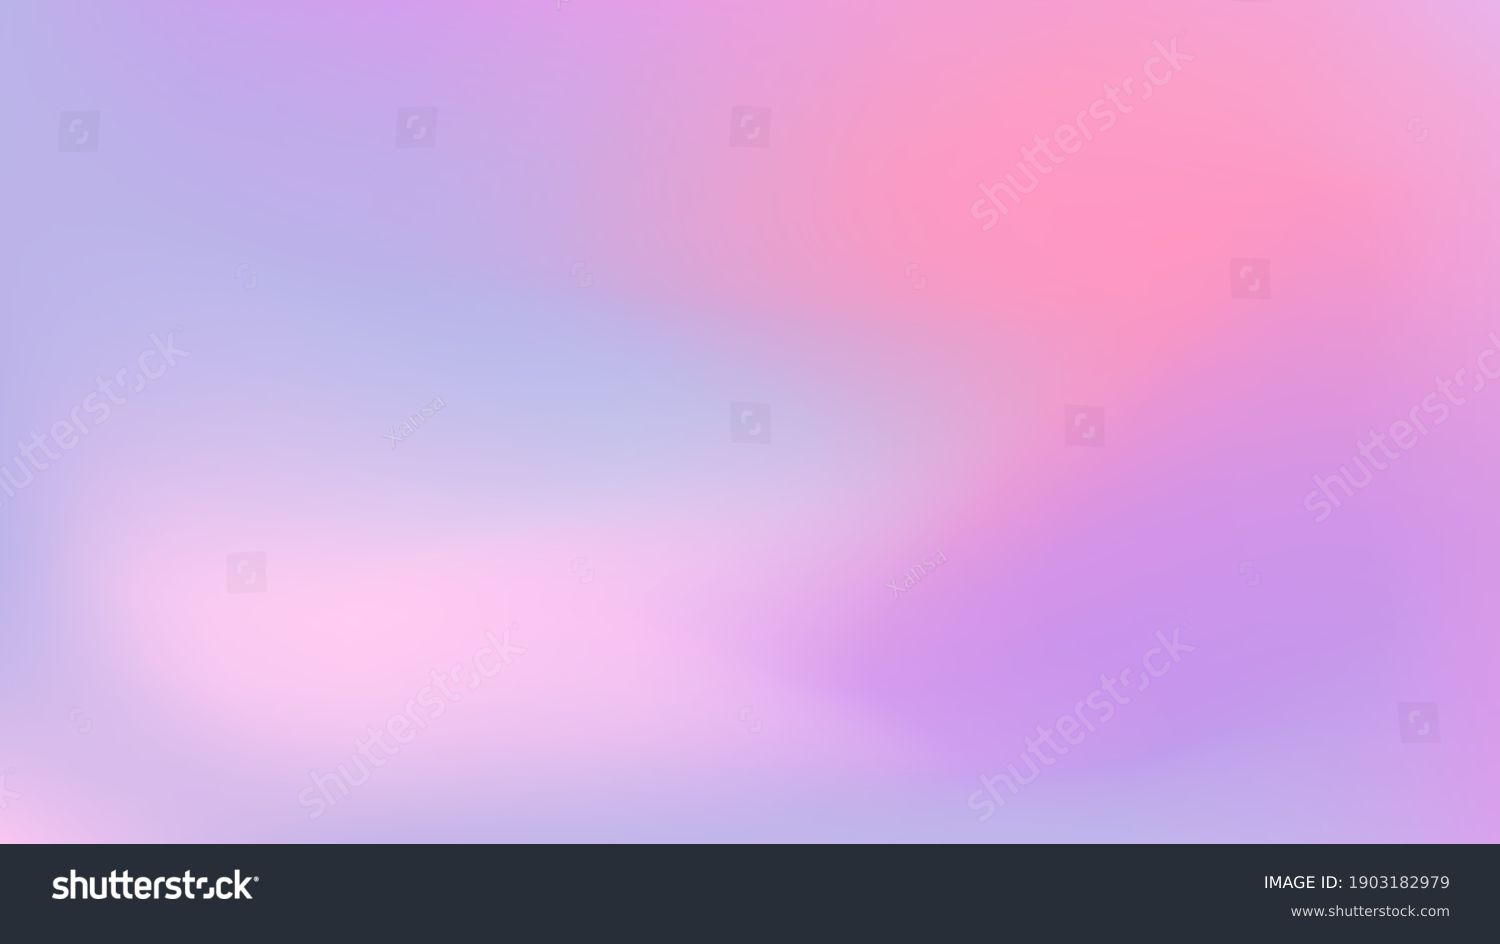 SVG of Abstract color vector banner. Blurred light fresh gradient background. Pastel pink, blue, lilac smooth spots. Neutral Liquid stains banner with place for your text. Vector gentle template illustration svg